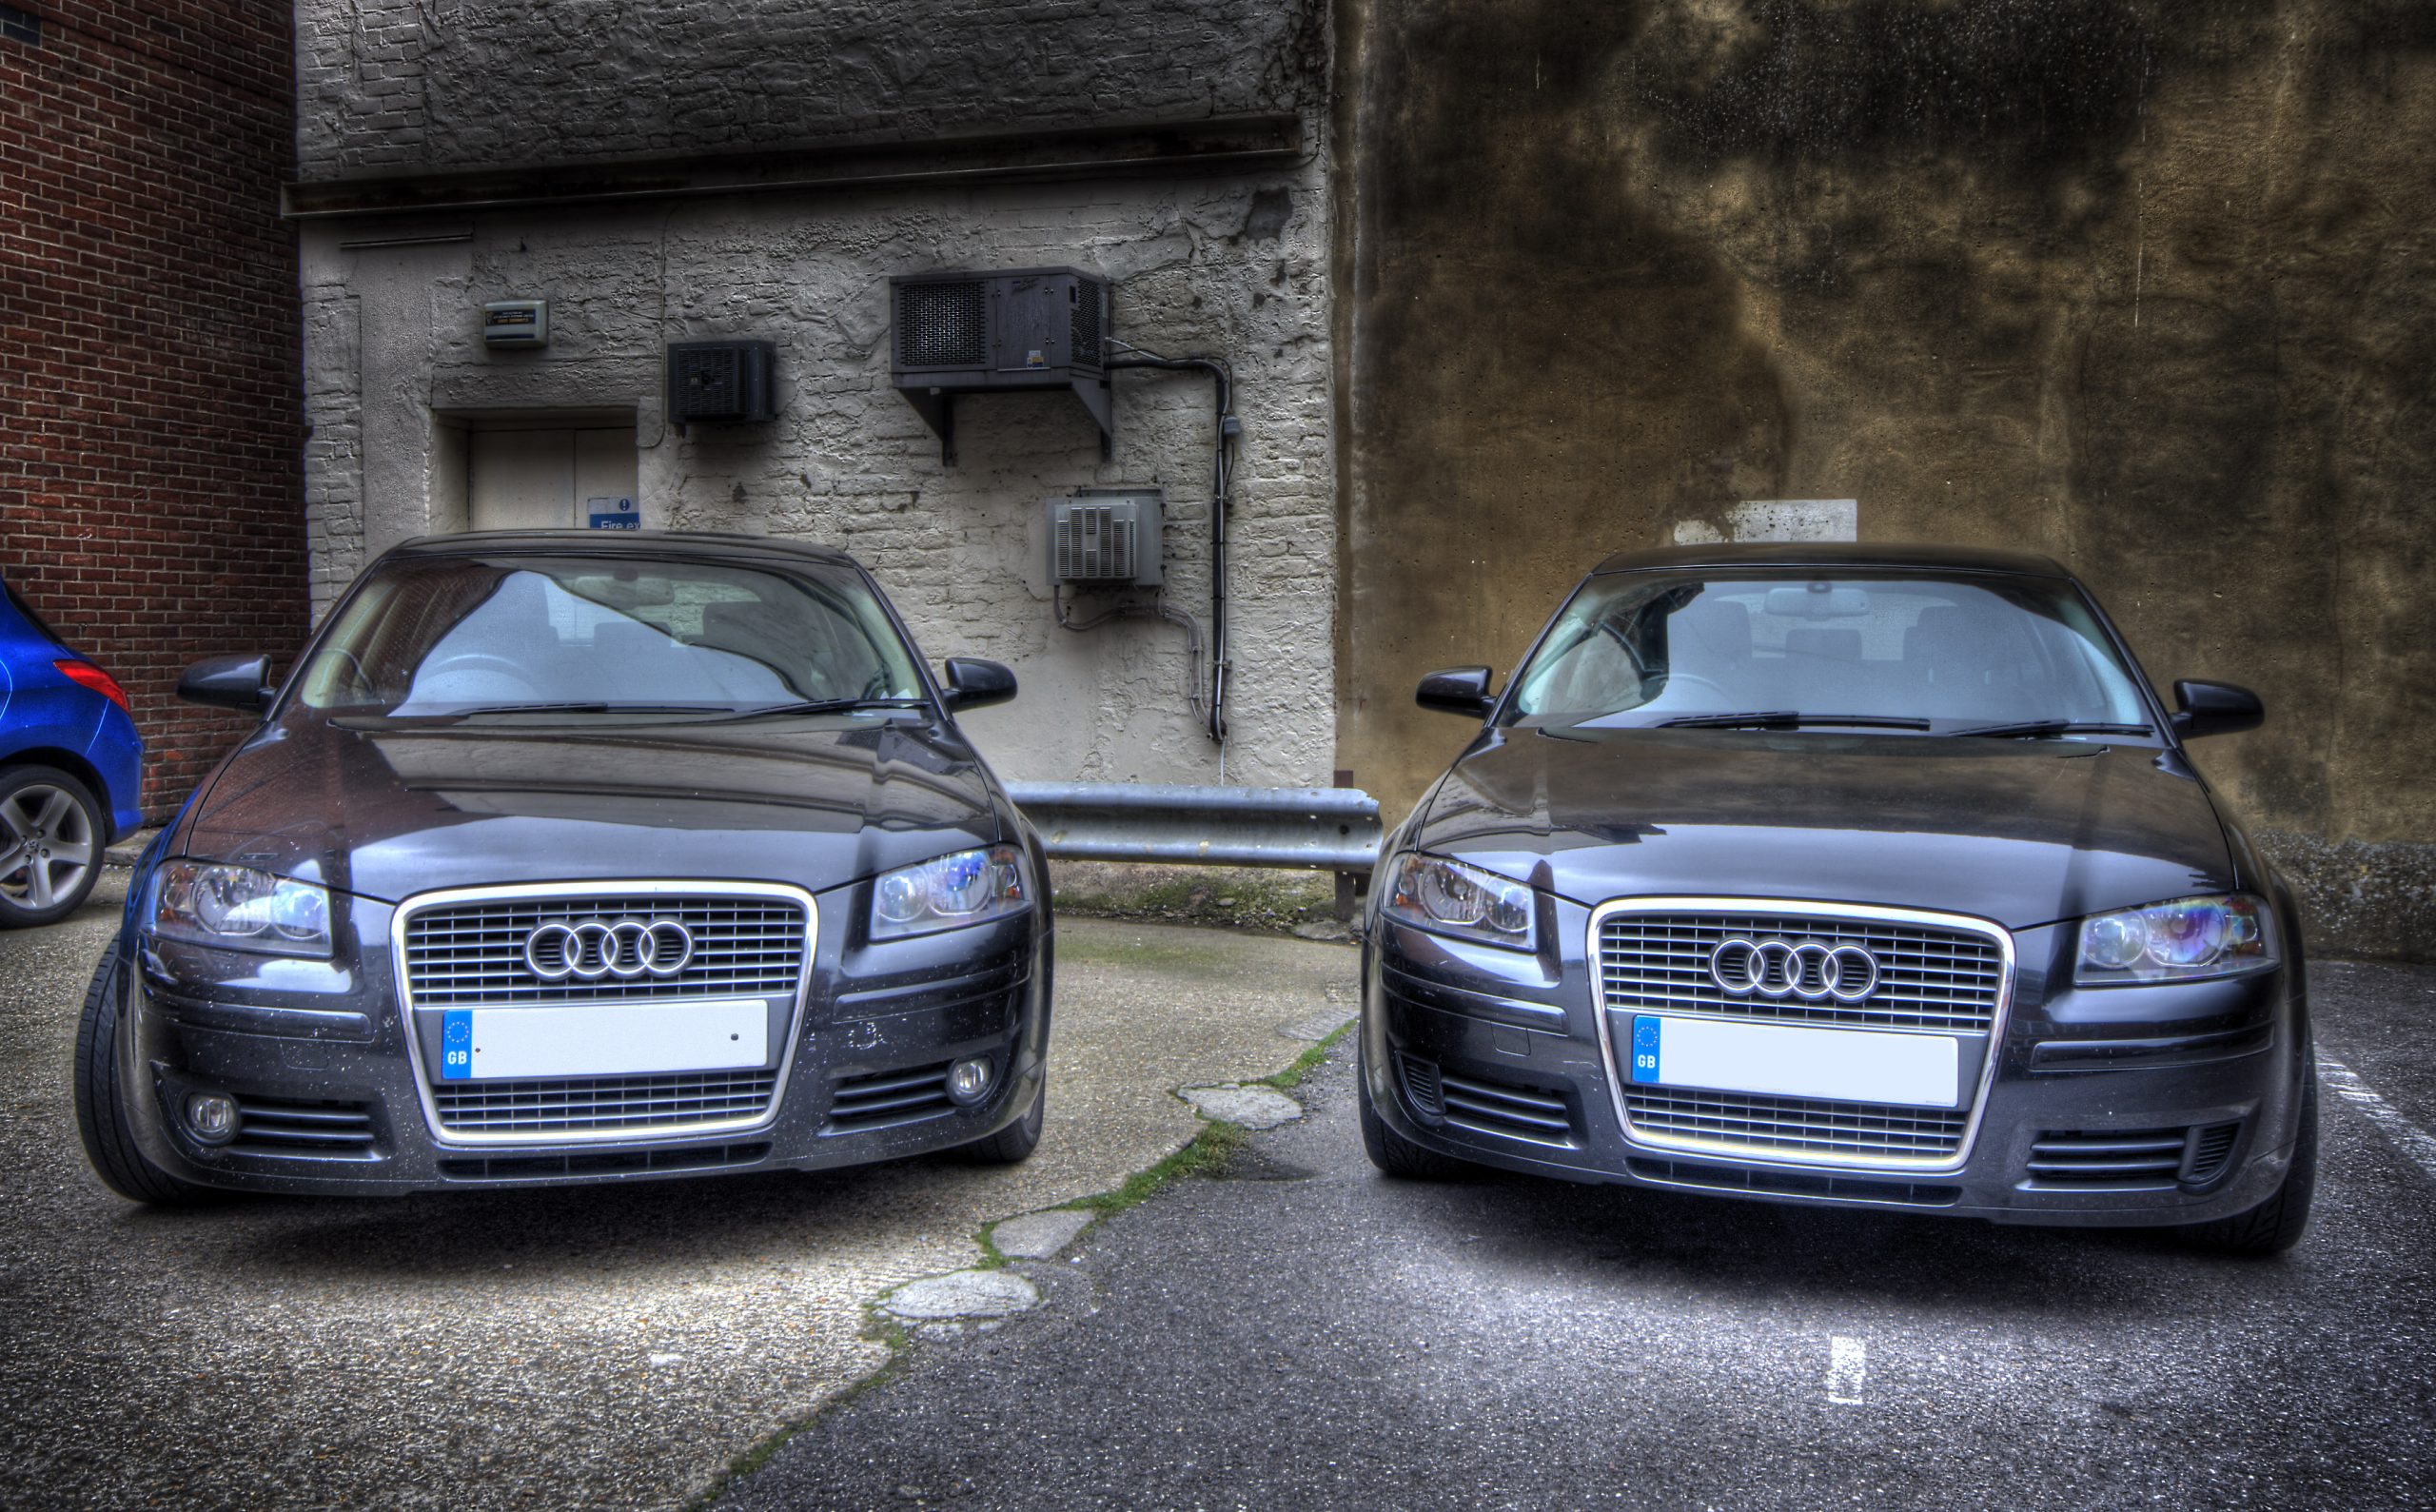 What to do if your number plate is cloned